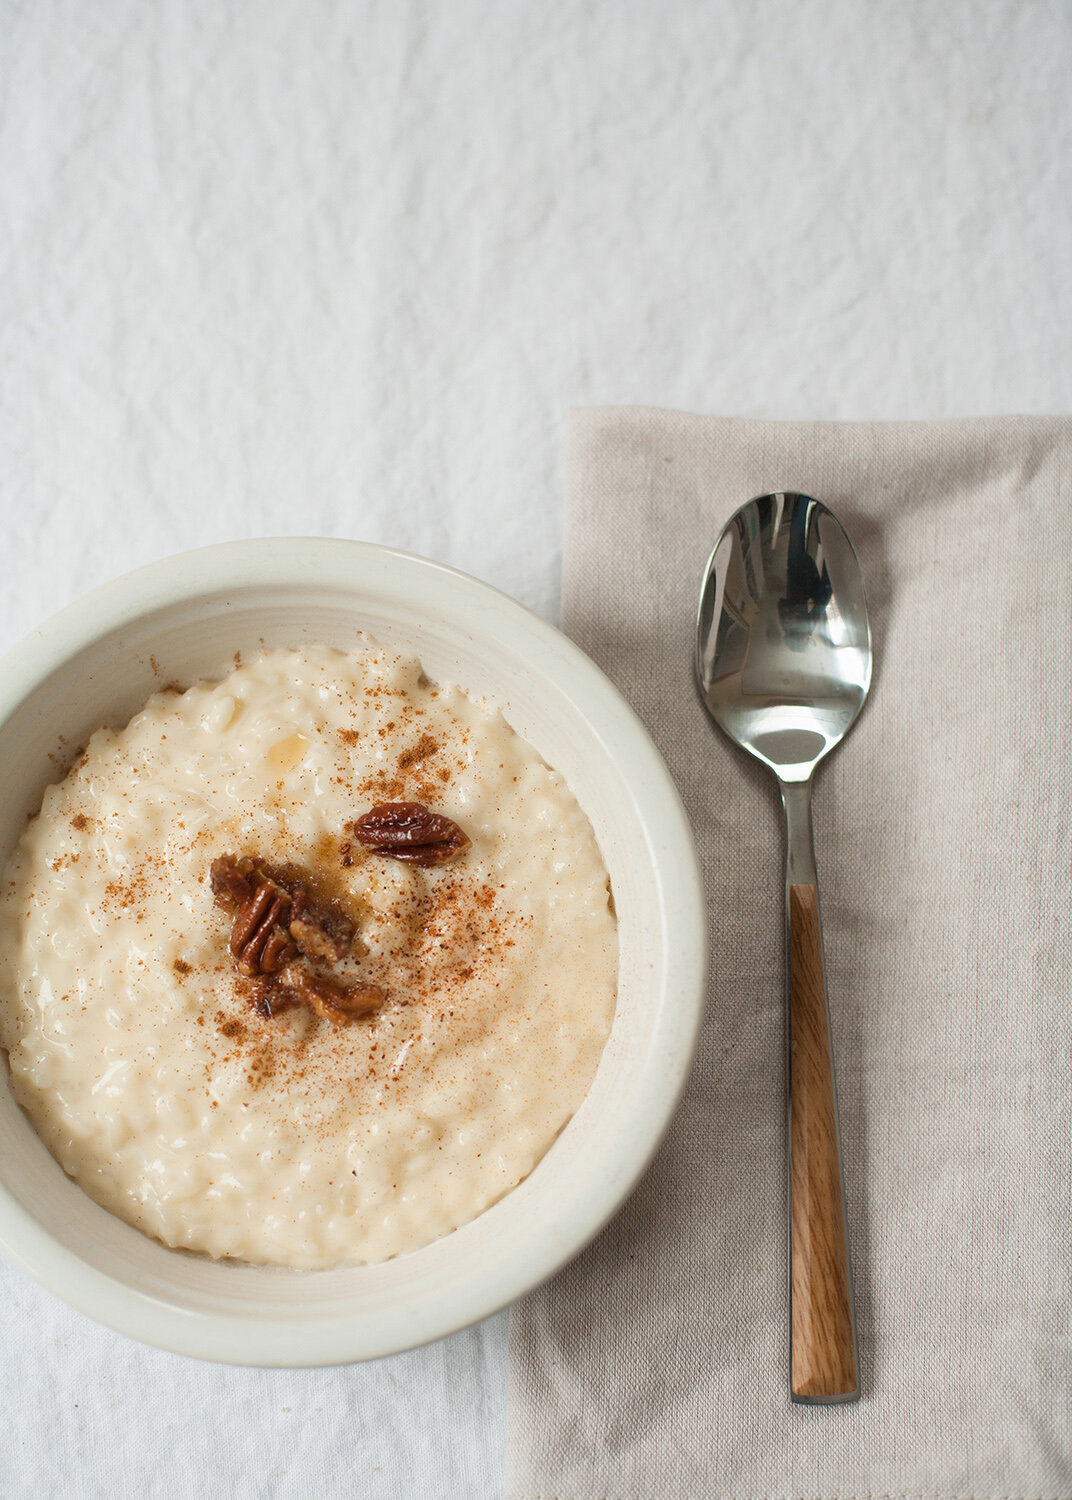 rice pudding photo by dena robles.jpg